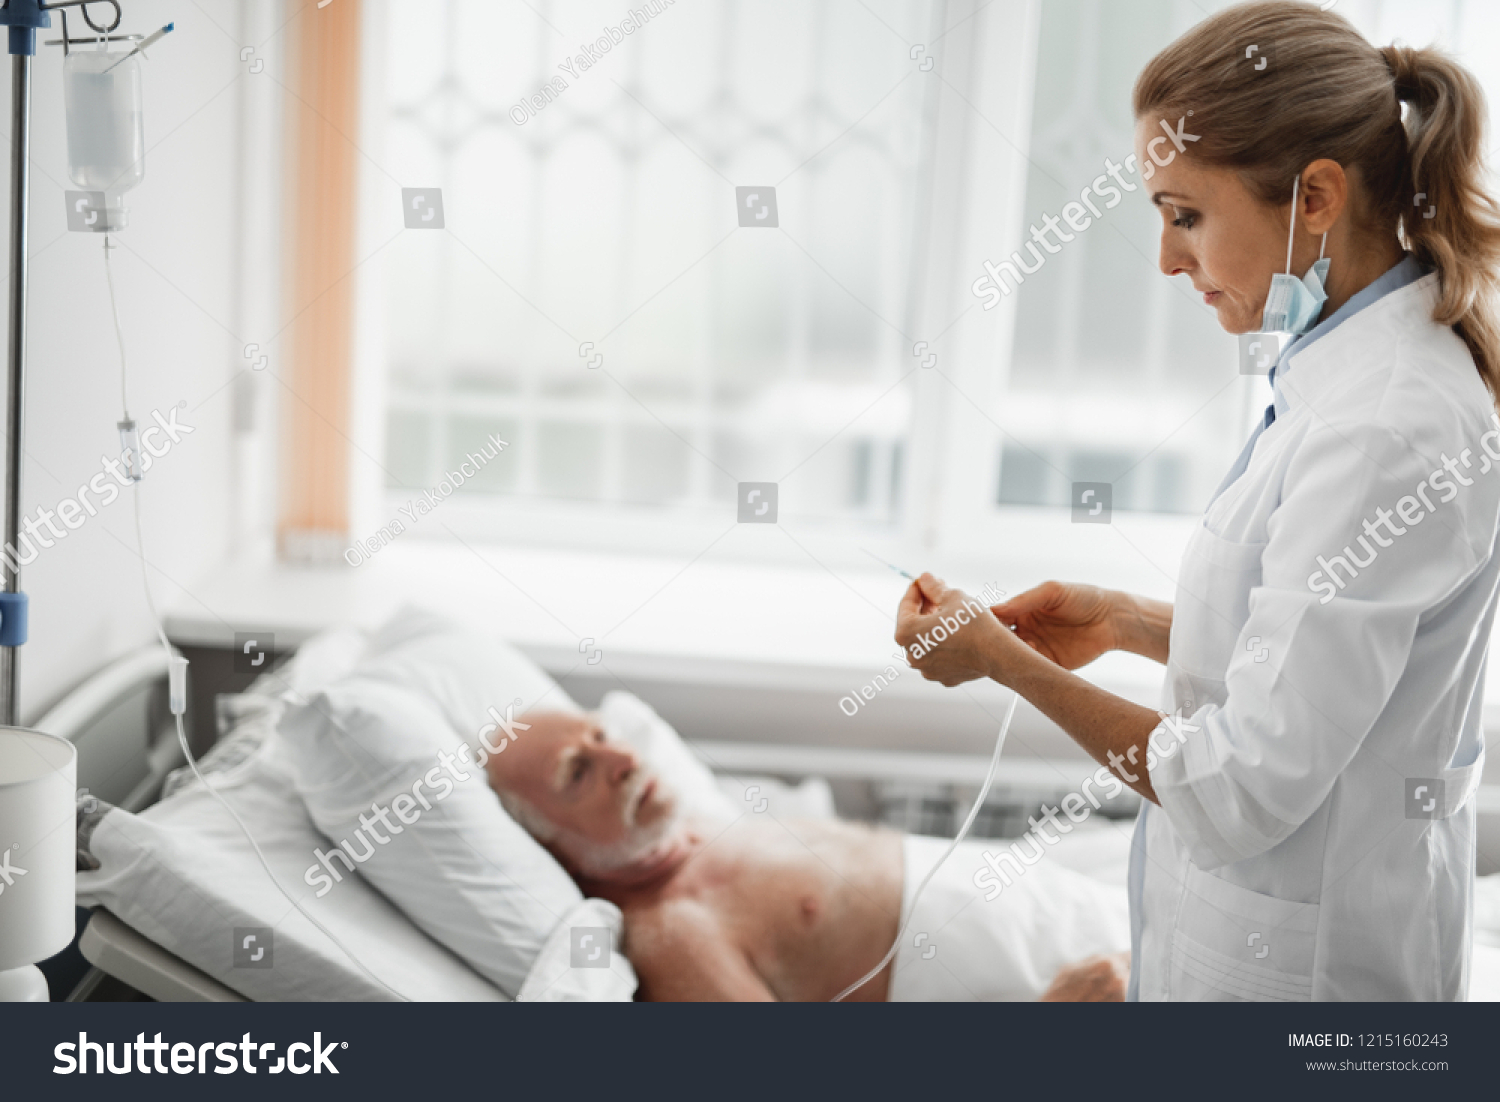 Side view portrait of young lady in white lab coat holding needle for intravenous infusion. Old man lying in bed on blurred background #1215160243